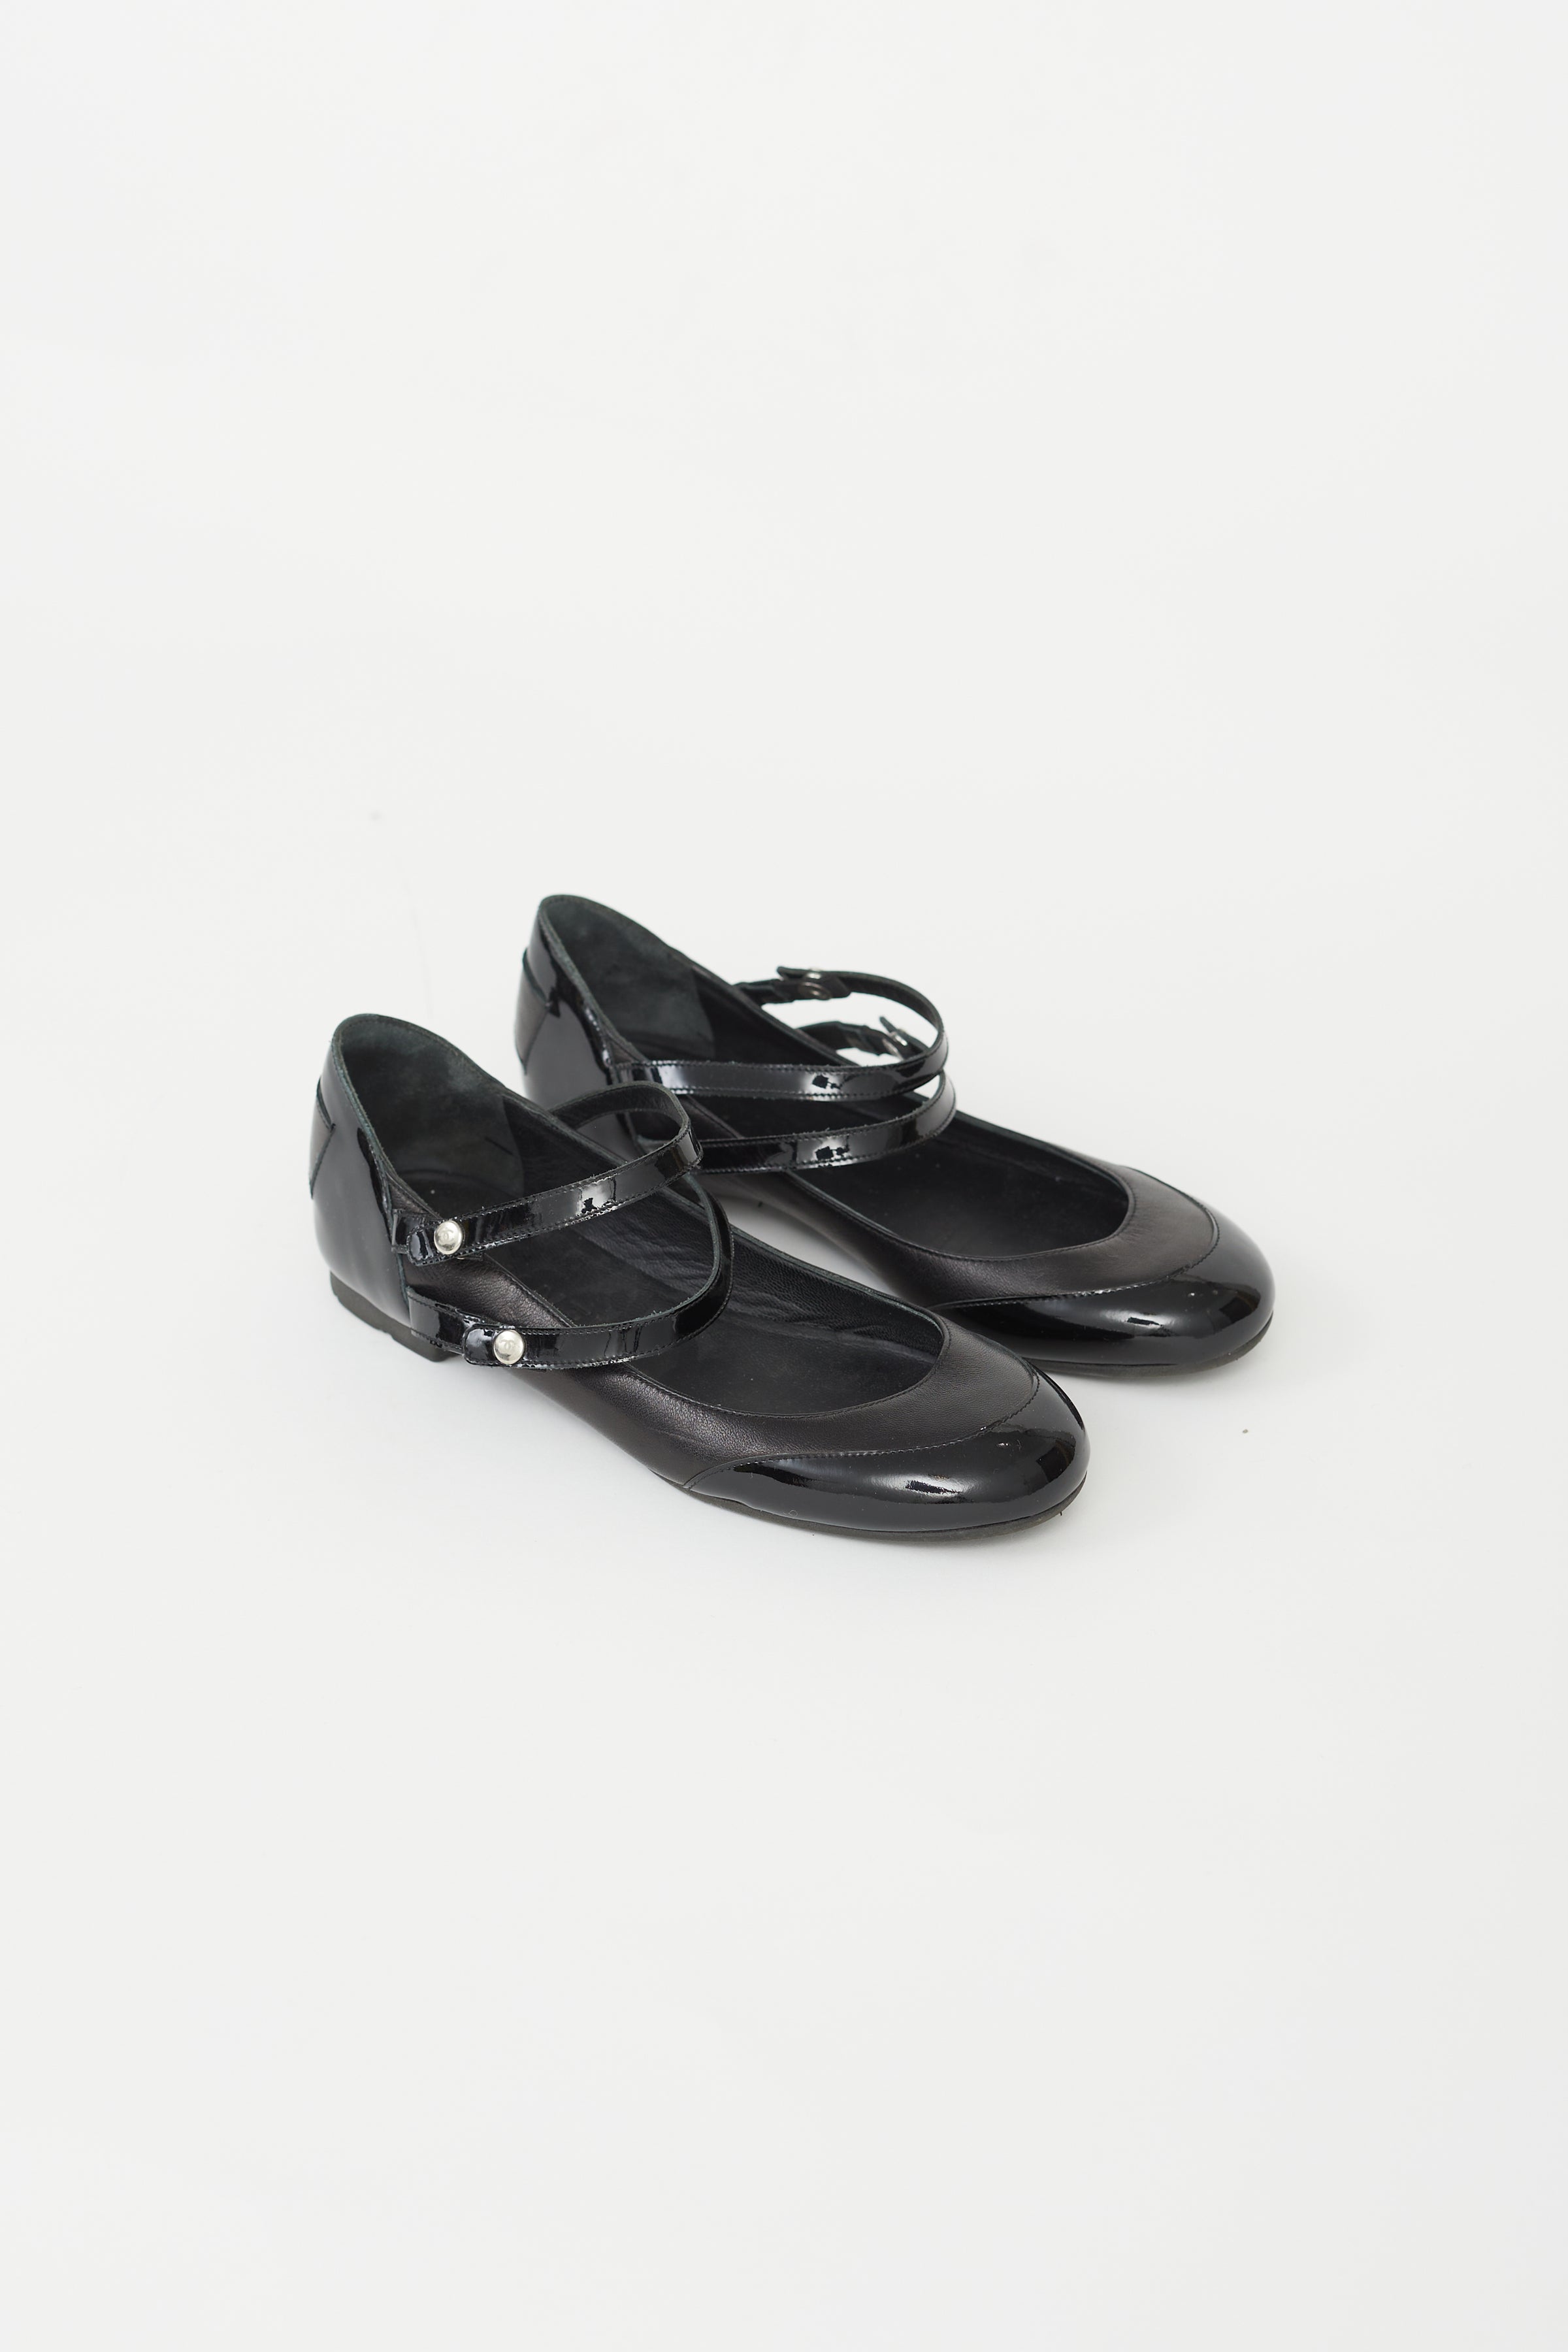 Chanel // Black Leather Double Strap Mary Jane Flat – VSP Consignment